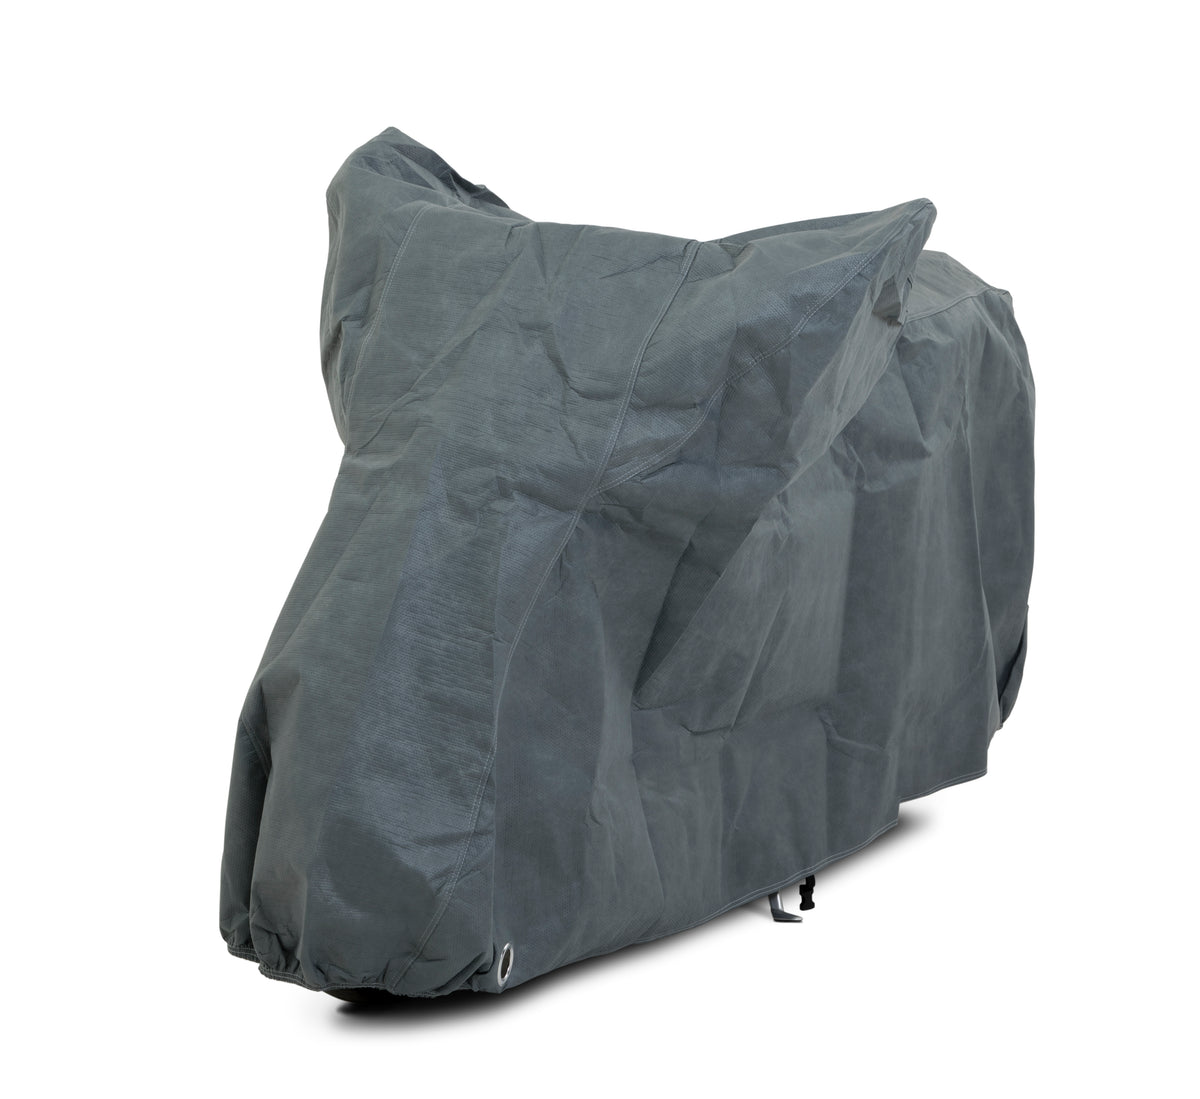 Stormforce best outdoor motorcycle covers for KTM